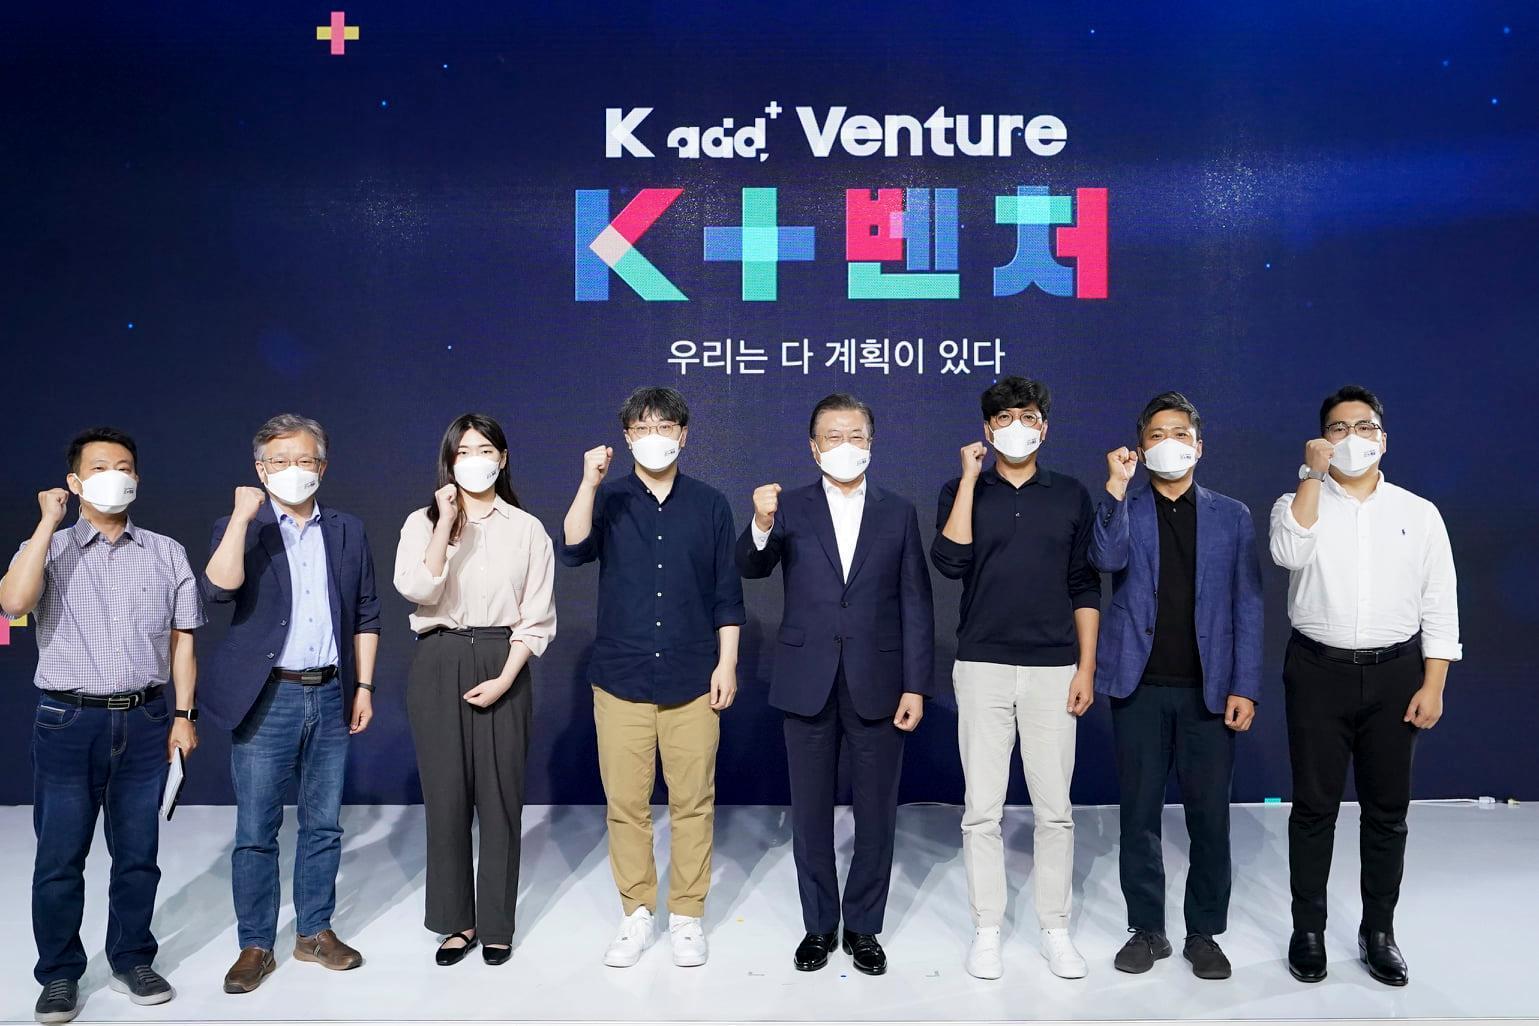 President Moon Jae-in at the "K+Venture" event at Cheong Wa Dae in Seoul on Aug. 26, 2021, on the government's push to foster the venture industry. (Yonhap)